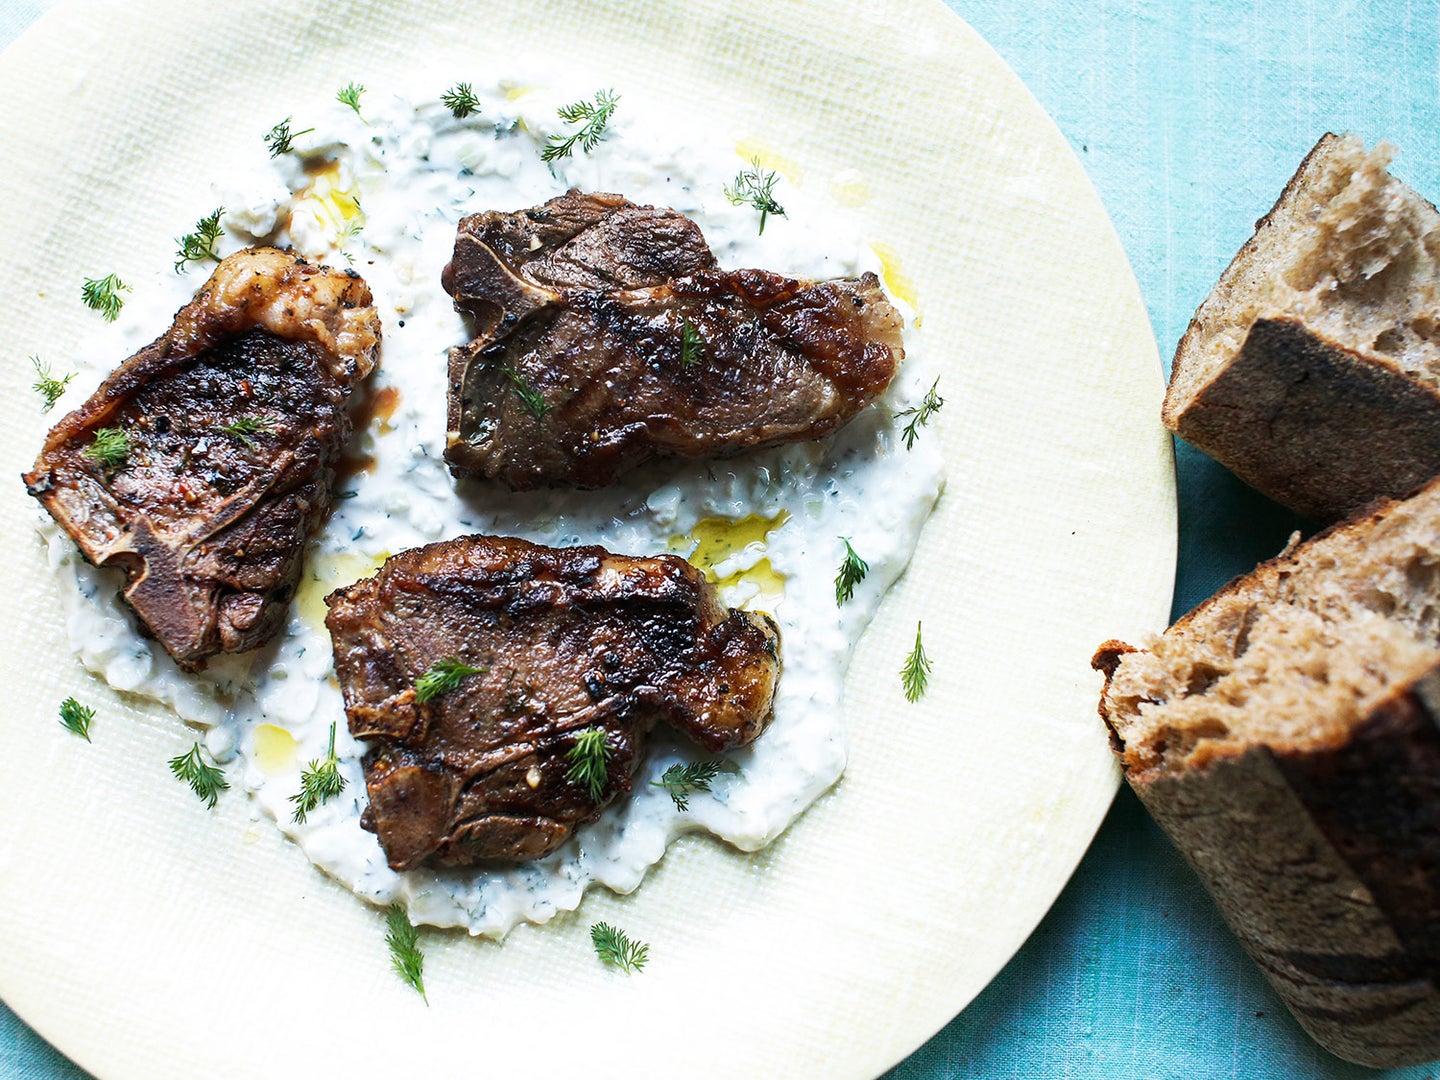 Grilled Lamb Chops with Tzatziki Sauce